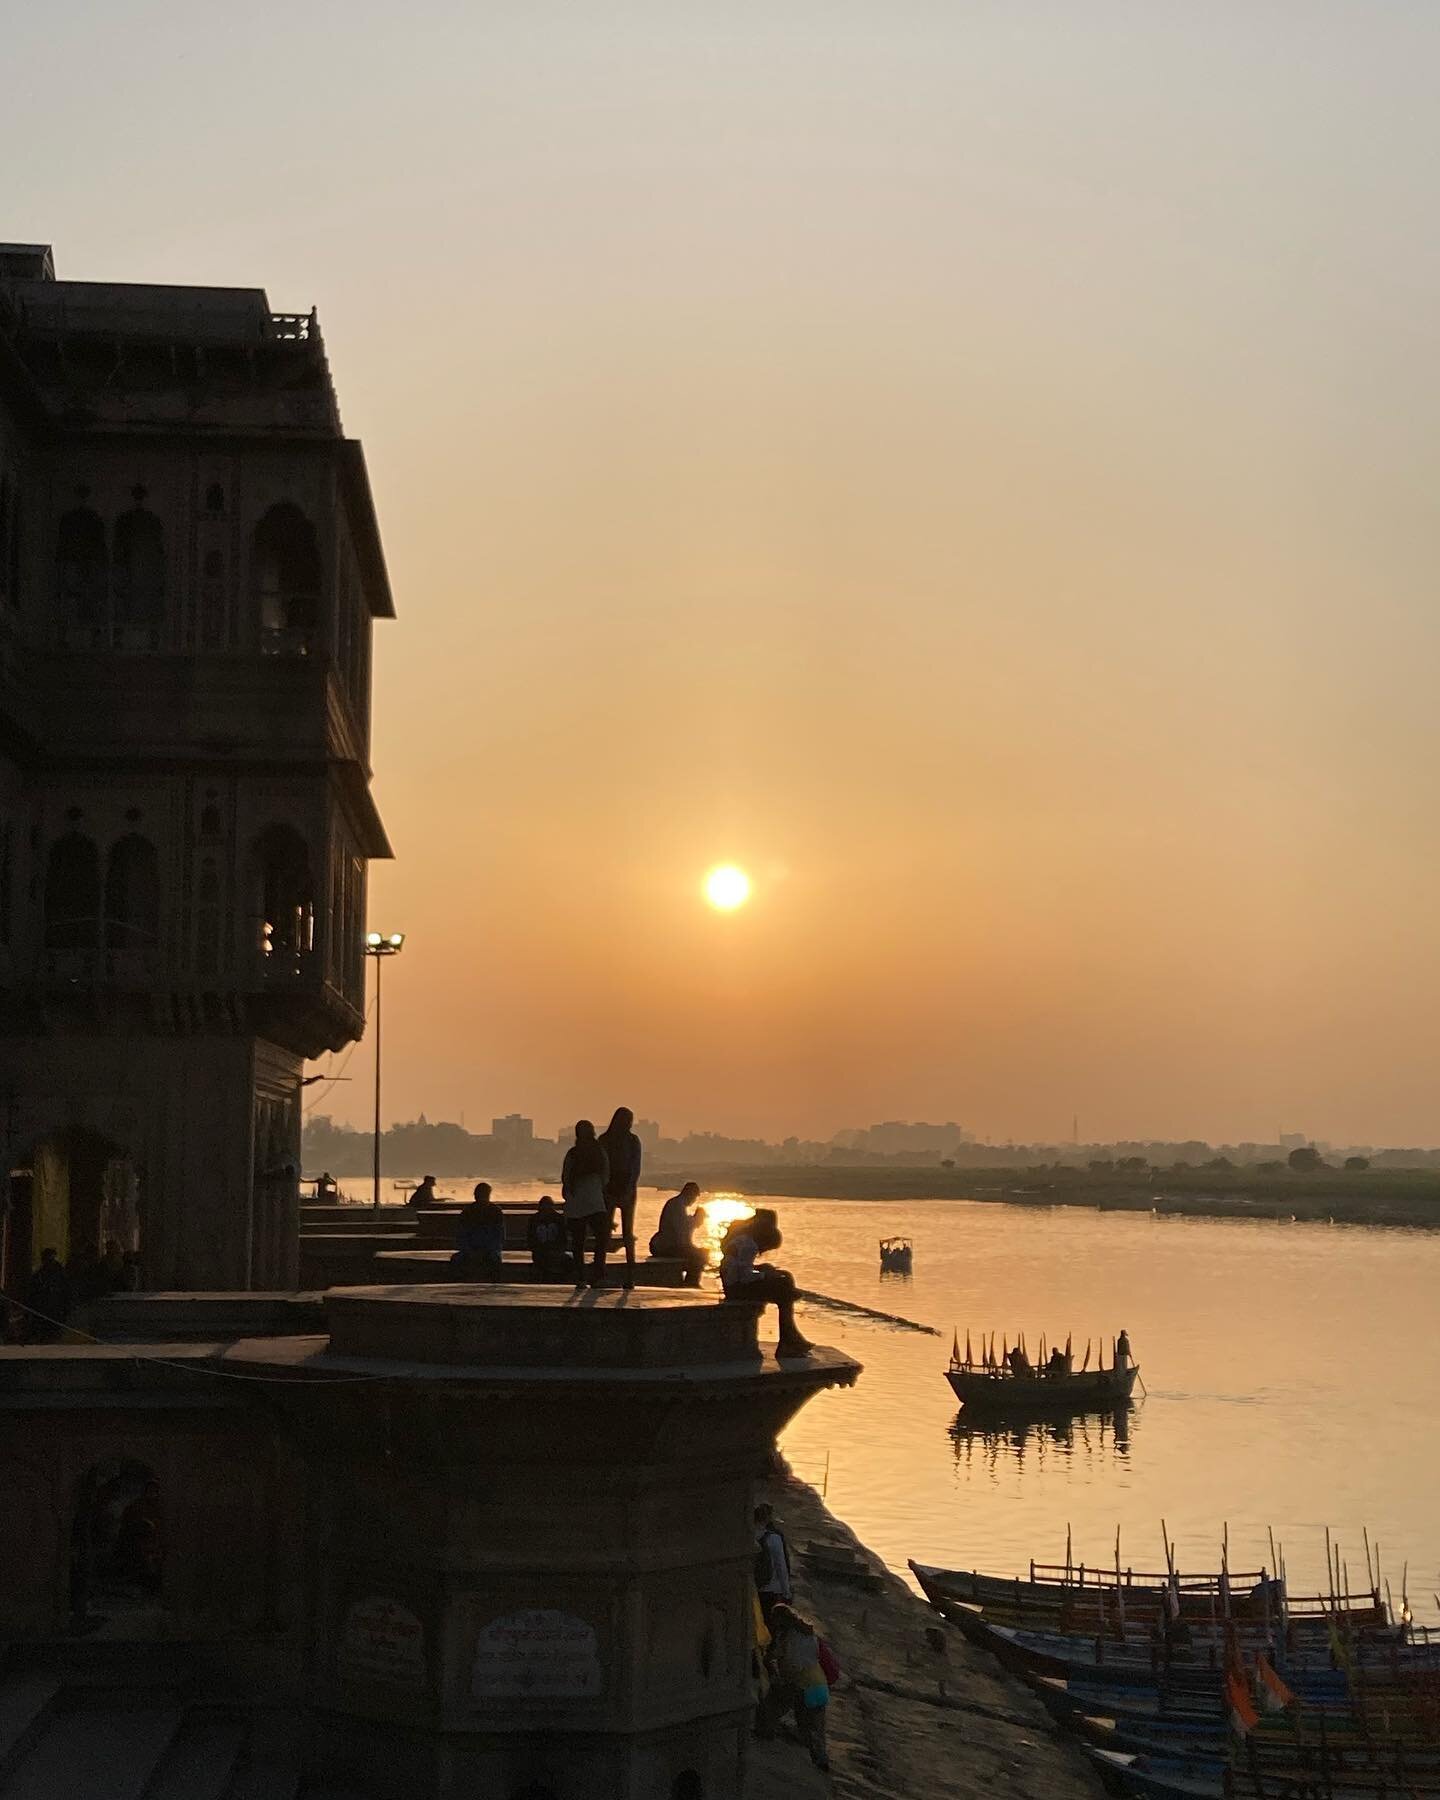 One of the sacred rivers of India, the Yamuna is the major tributary of the Ganges. It originates at the foot of the Himalayas and it&rsquo;s 1,376 km long. 

The Yamuna flows through several parts of India crossing the states of Uttar Pradesh, Uttar